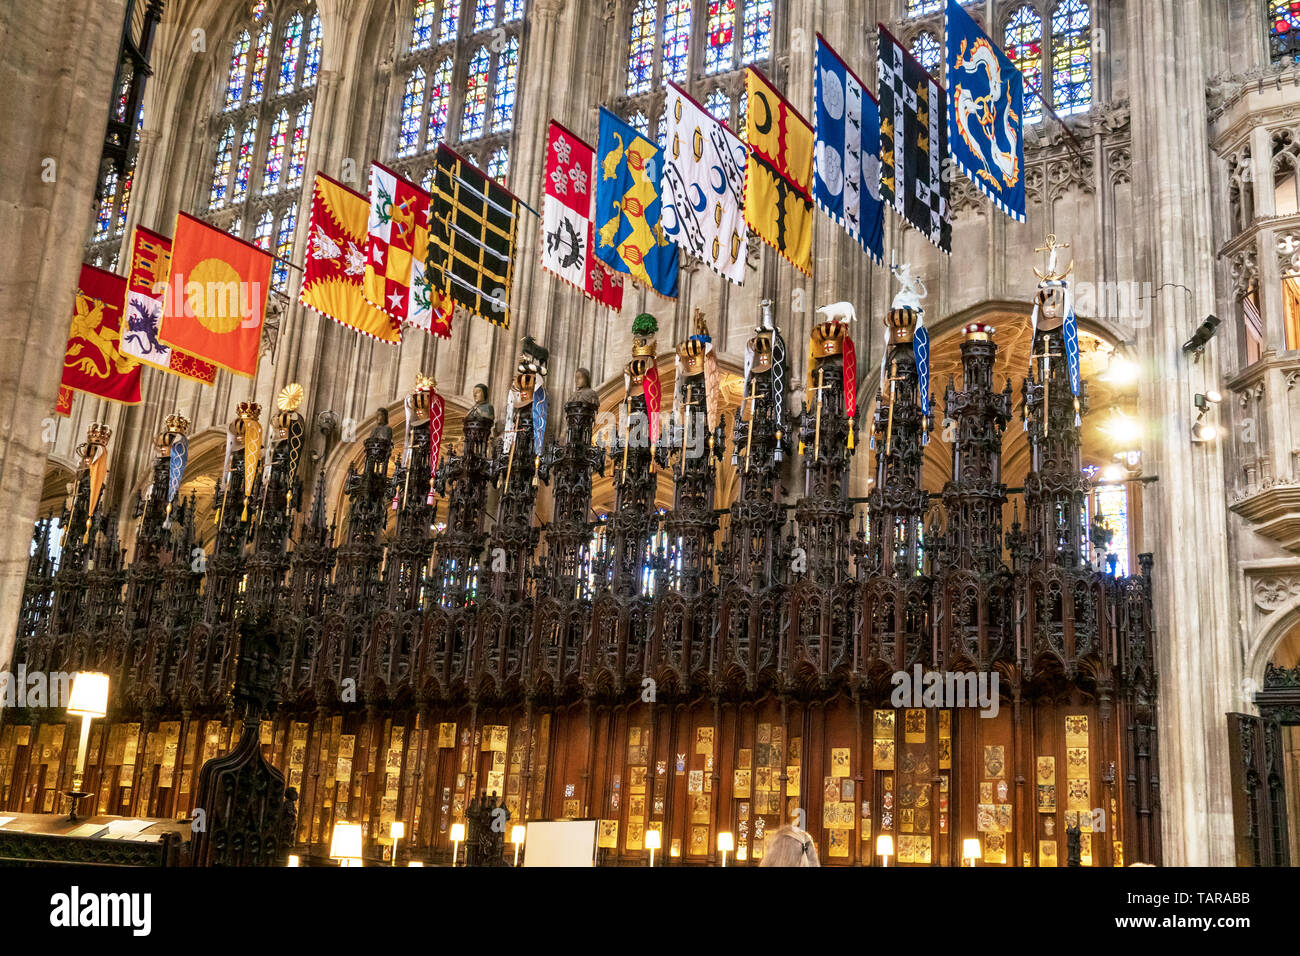 Windsor, UK - May 13, 2019: Interior of the medieval St. George's chapel the host of prince William and Meghan Markle wedding ceremony in windsor, England UK . Stock Photo